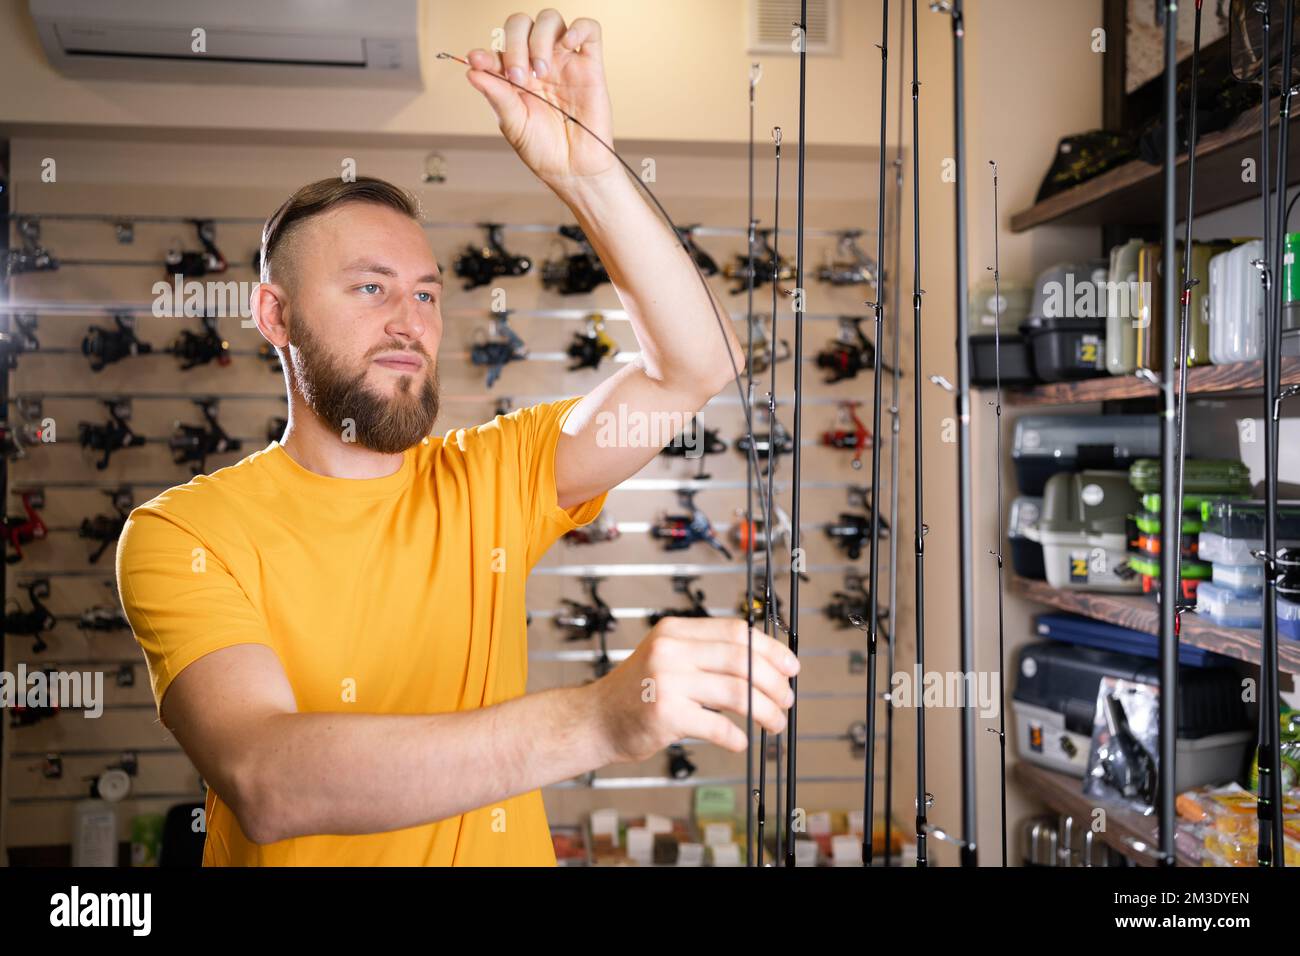 Man chooses ocean fishing rod in the sports shop, copy space Stock Photo